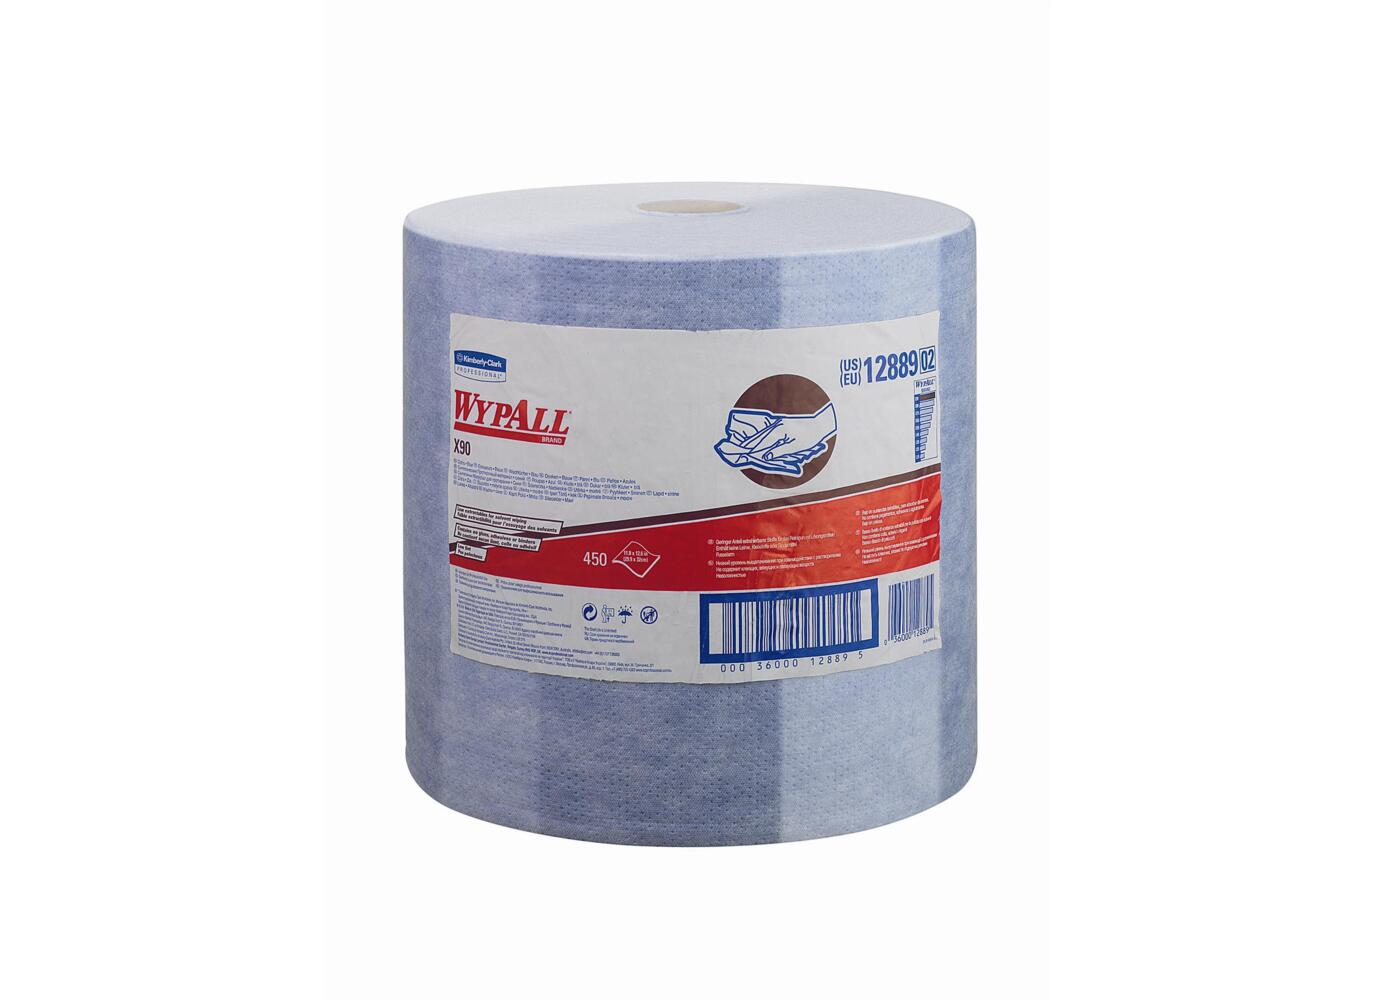 WypAll® X90 Cloths 12889 - 1 large roll x 450 blue, 2 ply cloths - 12889